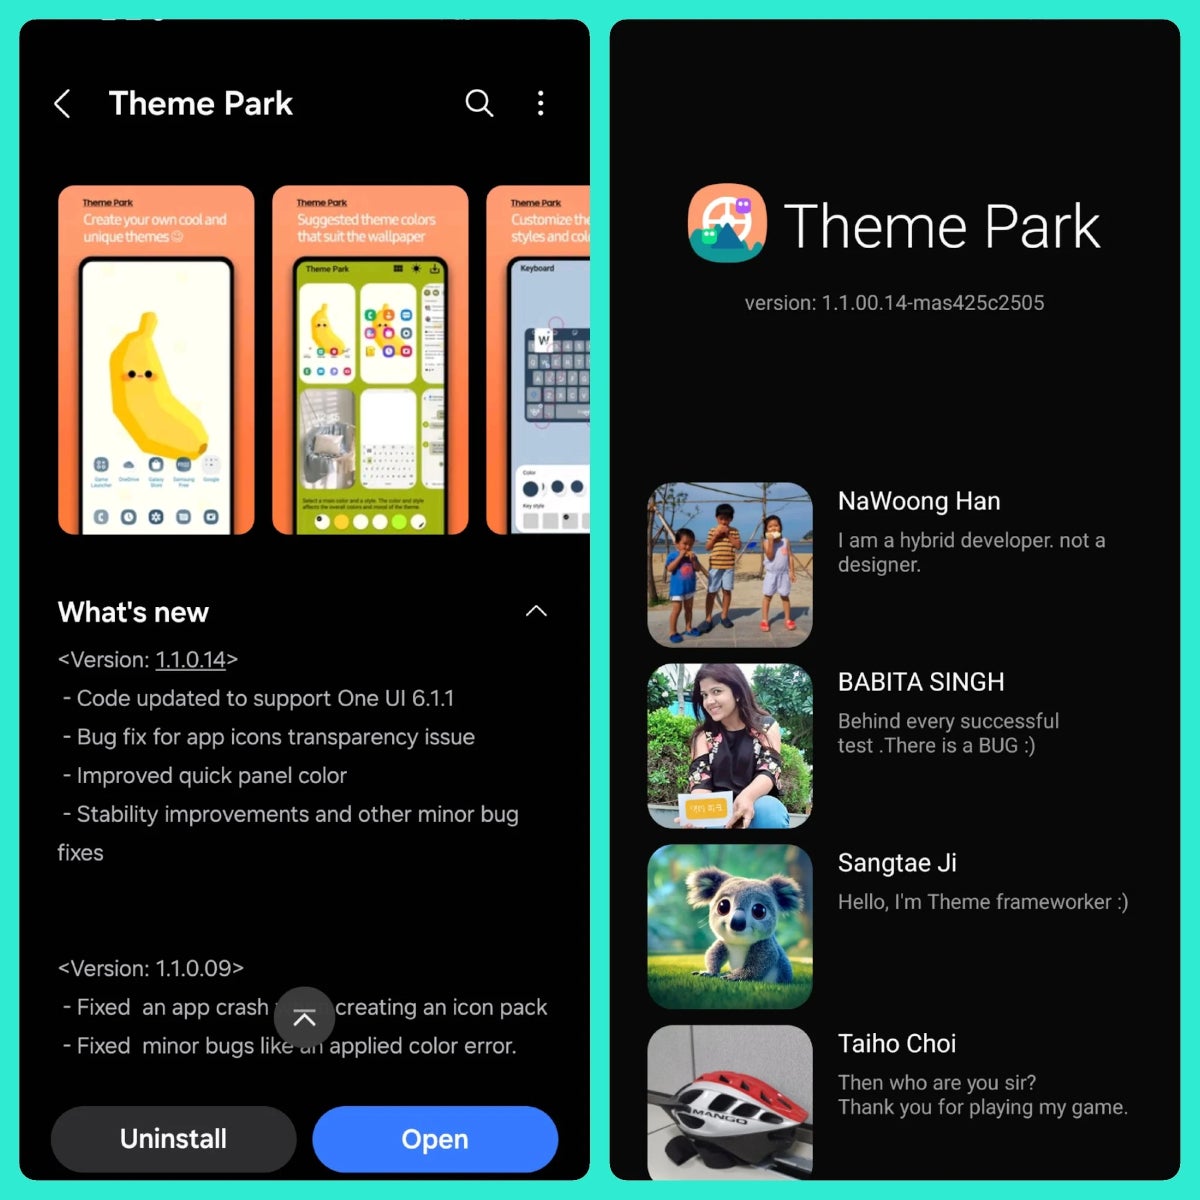 Theme Park update adds One UI 6.1.1 support, Credits - SamMobile - Samsung’s apps getting One UI 6.1.1 support ahead of Galaxy Z Fold 6&#039;s launch